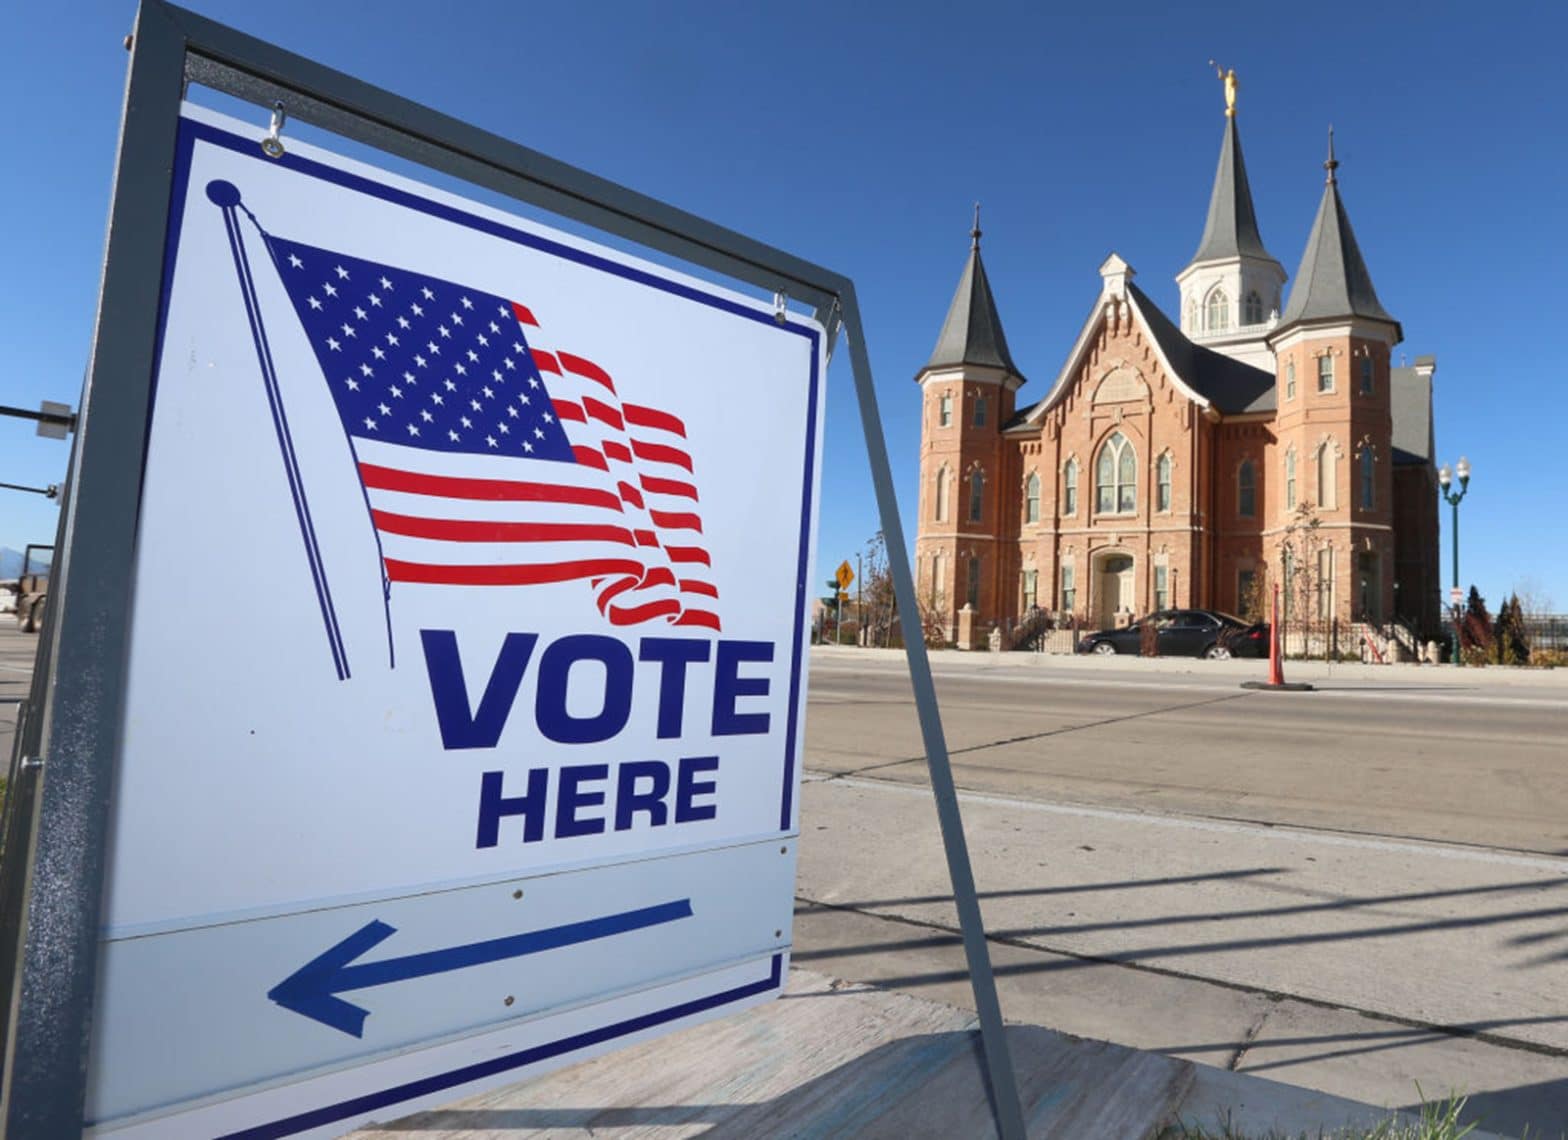 Utah Tests Ranked-Choice Voting’s Conservative Appeal